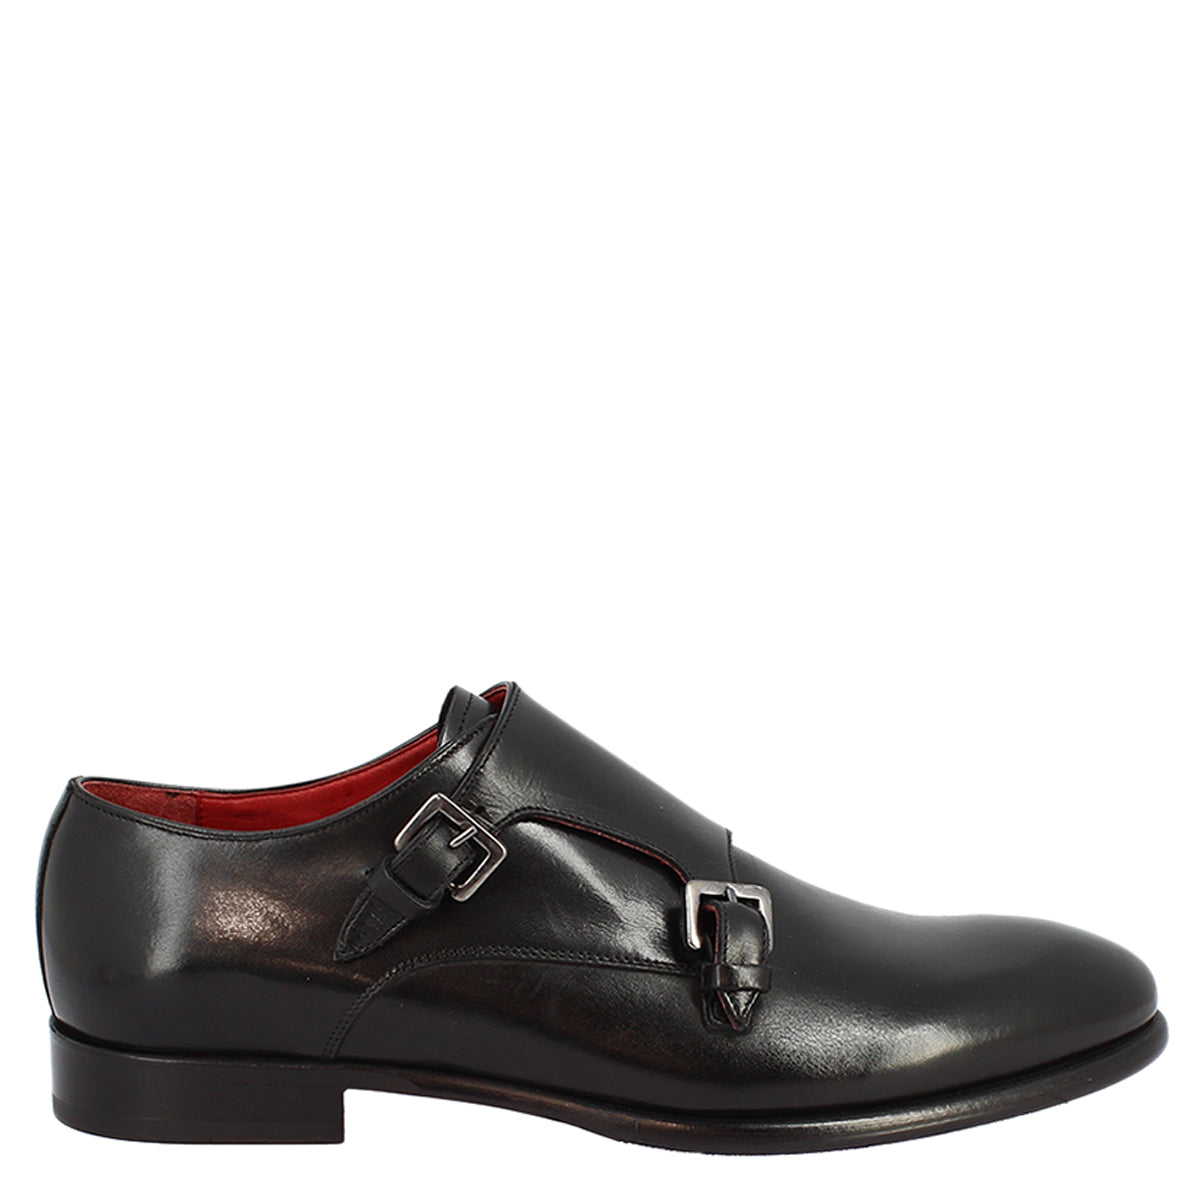 Handmade men's double buckle shoes in black leather